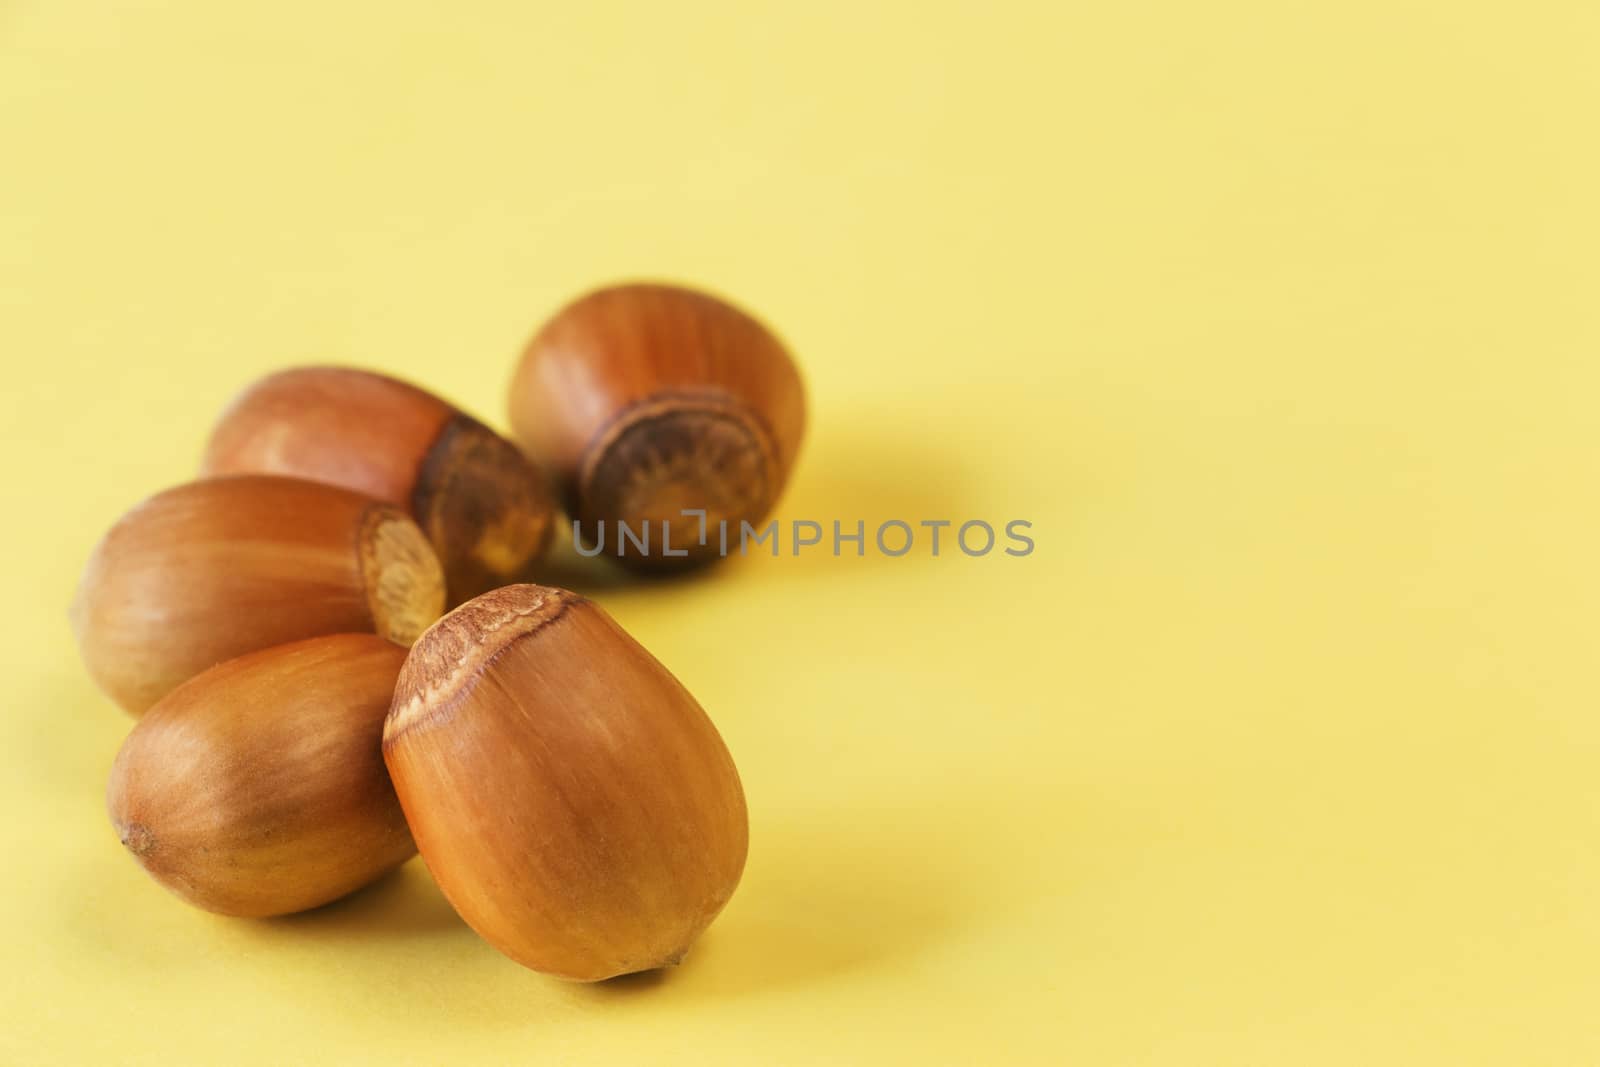 A group of hazelnuts on a colored background ,front view ,studio shot ,selective focus